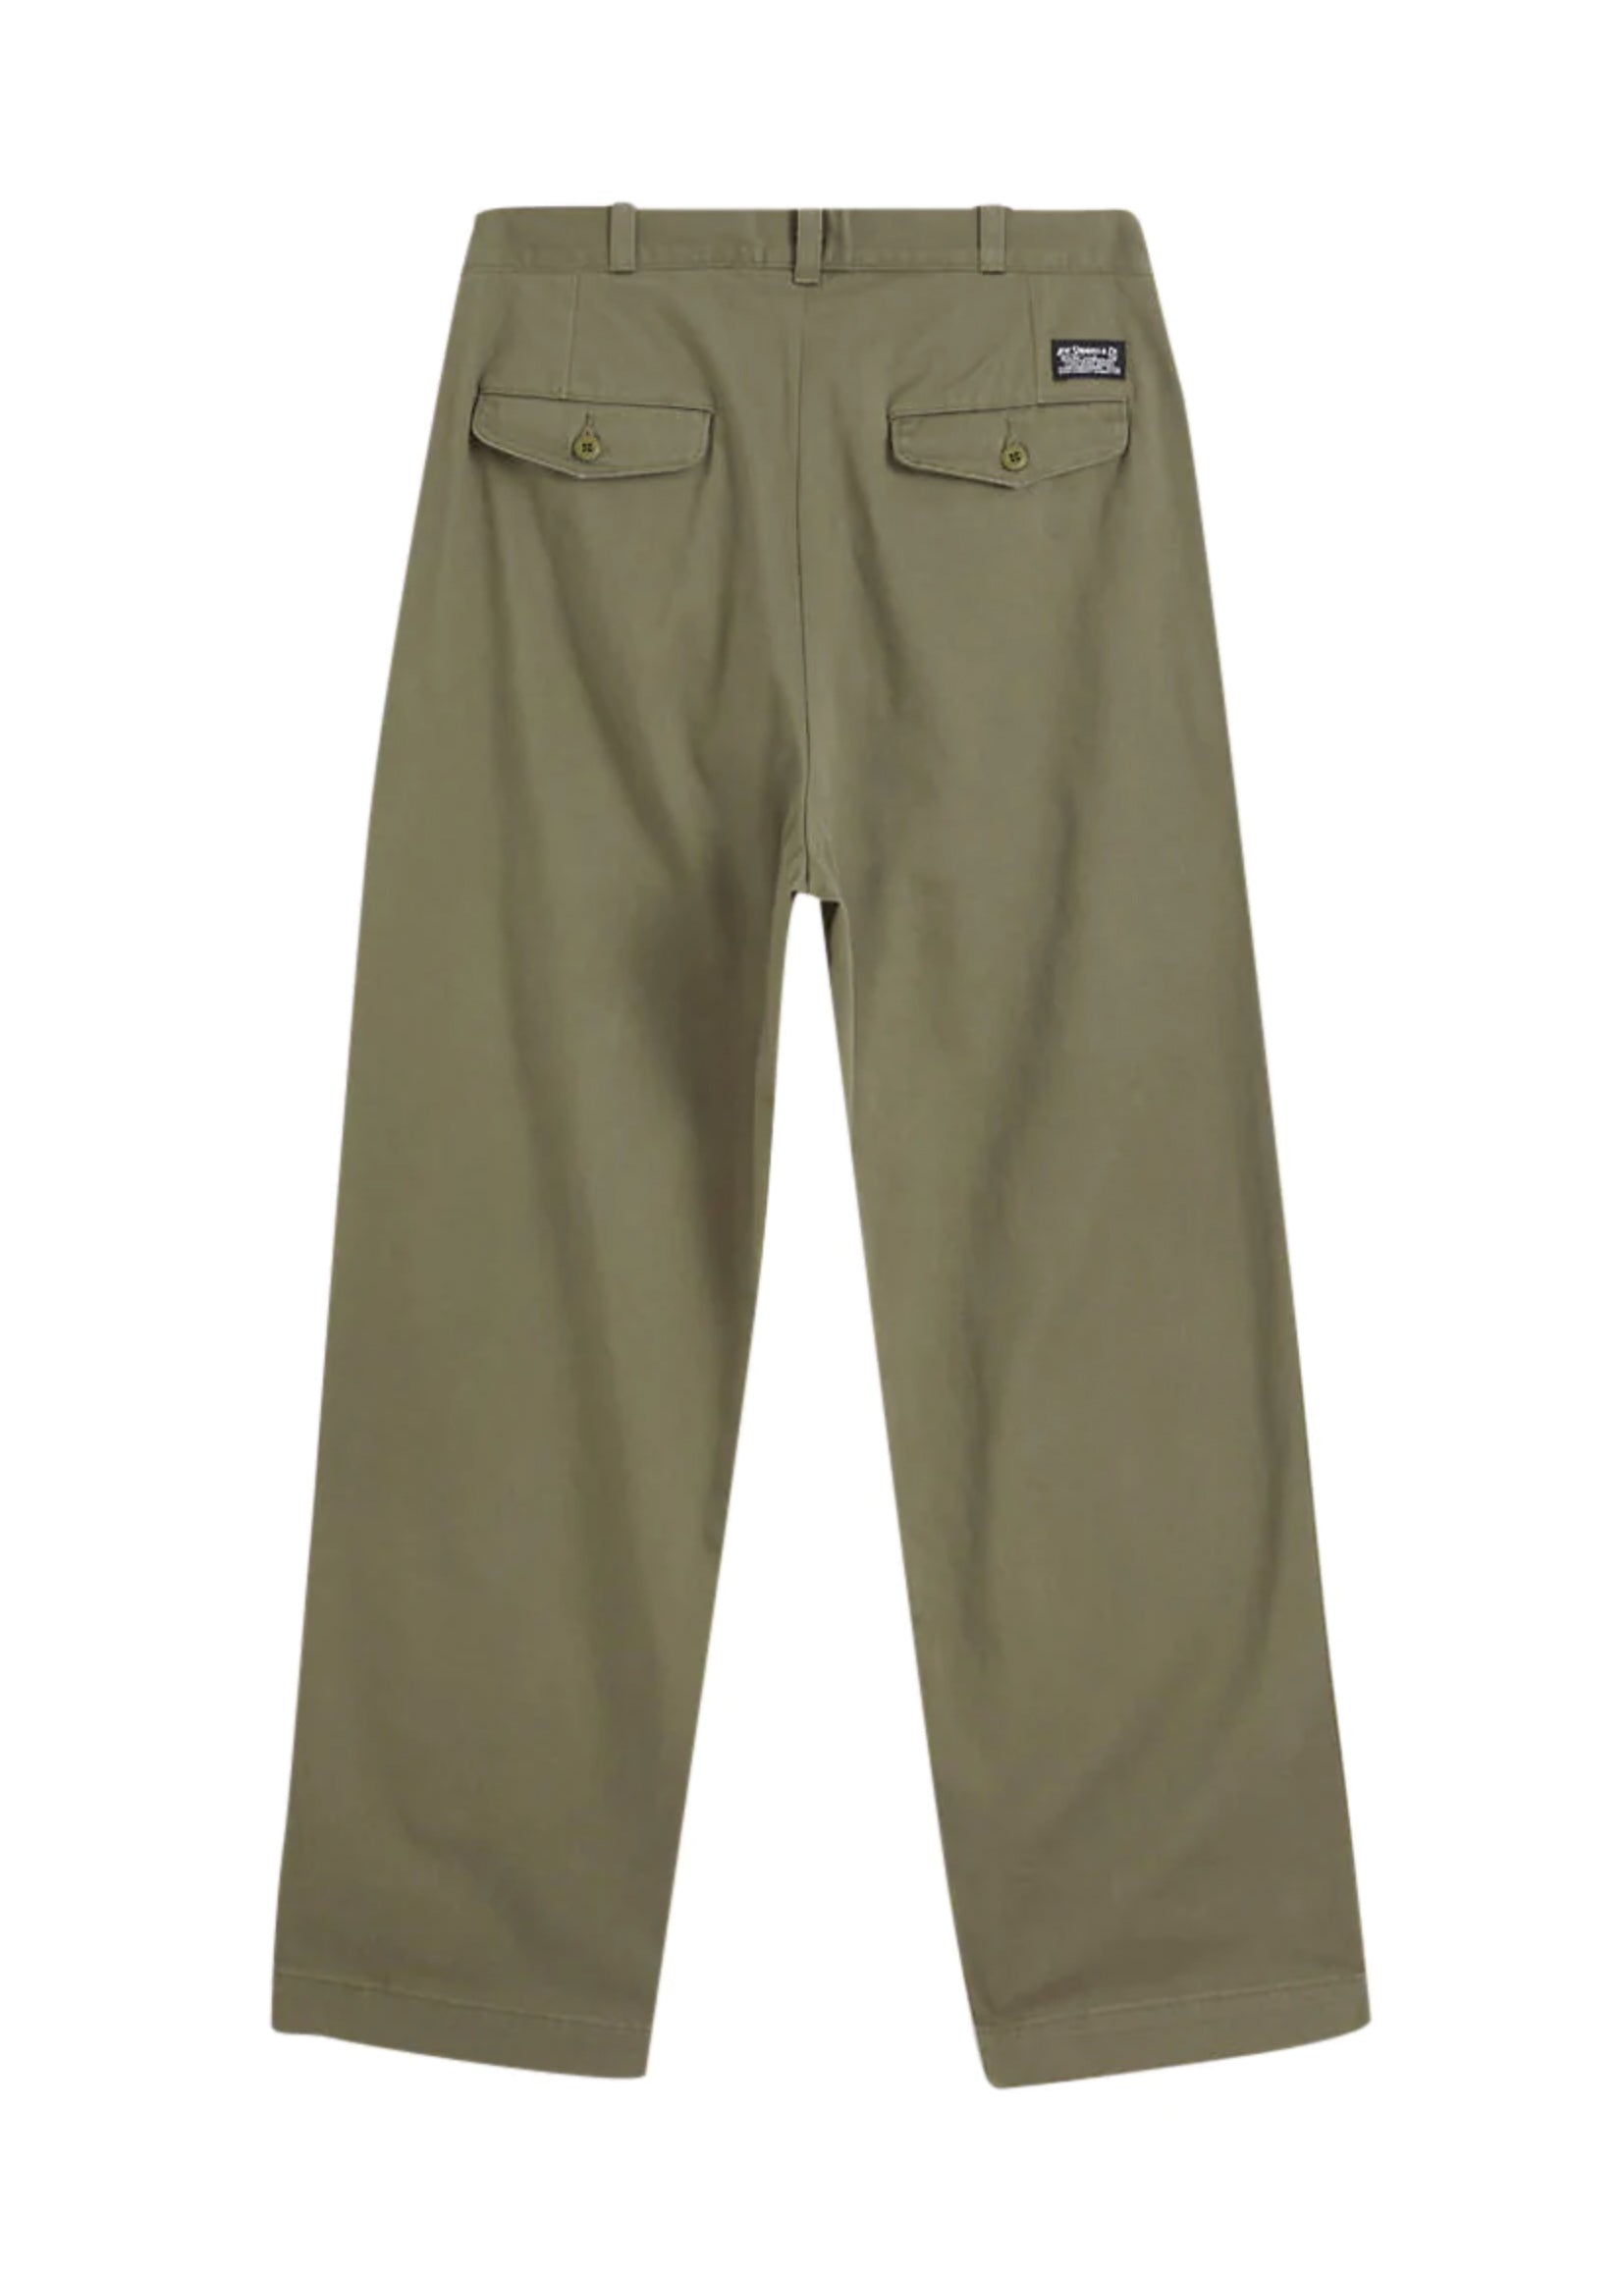 Levi's - Skate Loose Chino - Dusty Olive